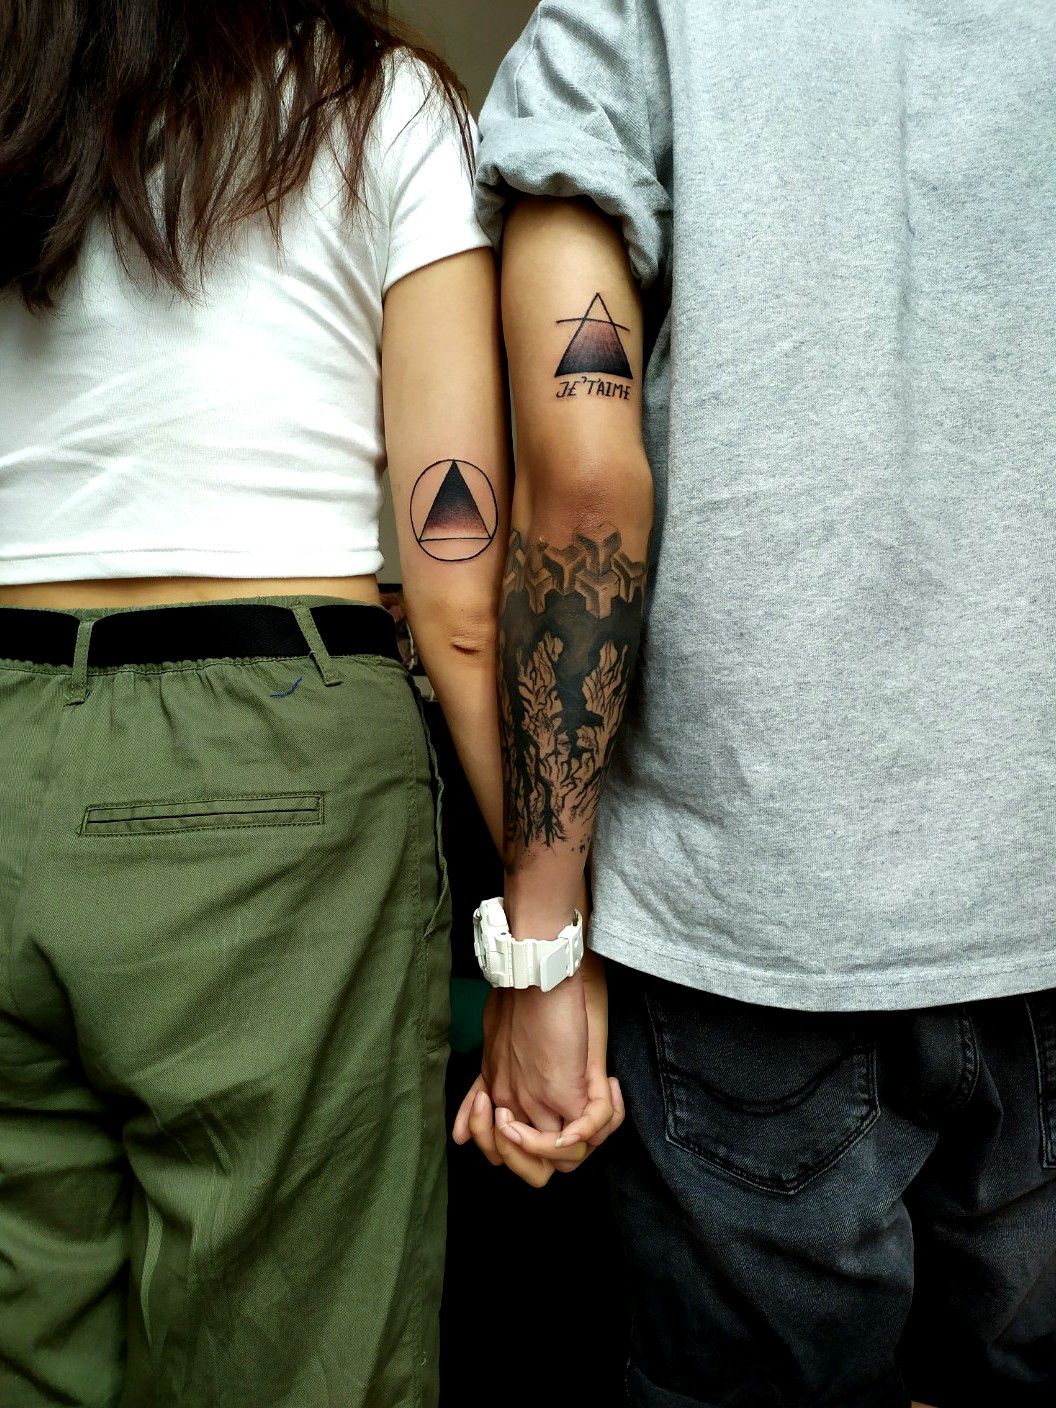 25 Cute Couples Tattoo Ideas To Gush Over  tattooglee  Cute couple tattoos  Couple tattoos unique Matching couple tattoos